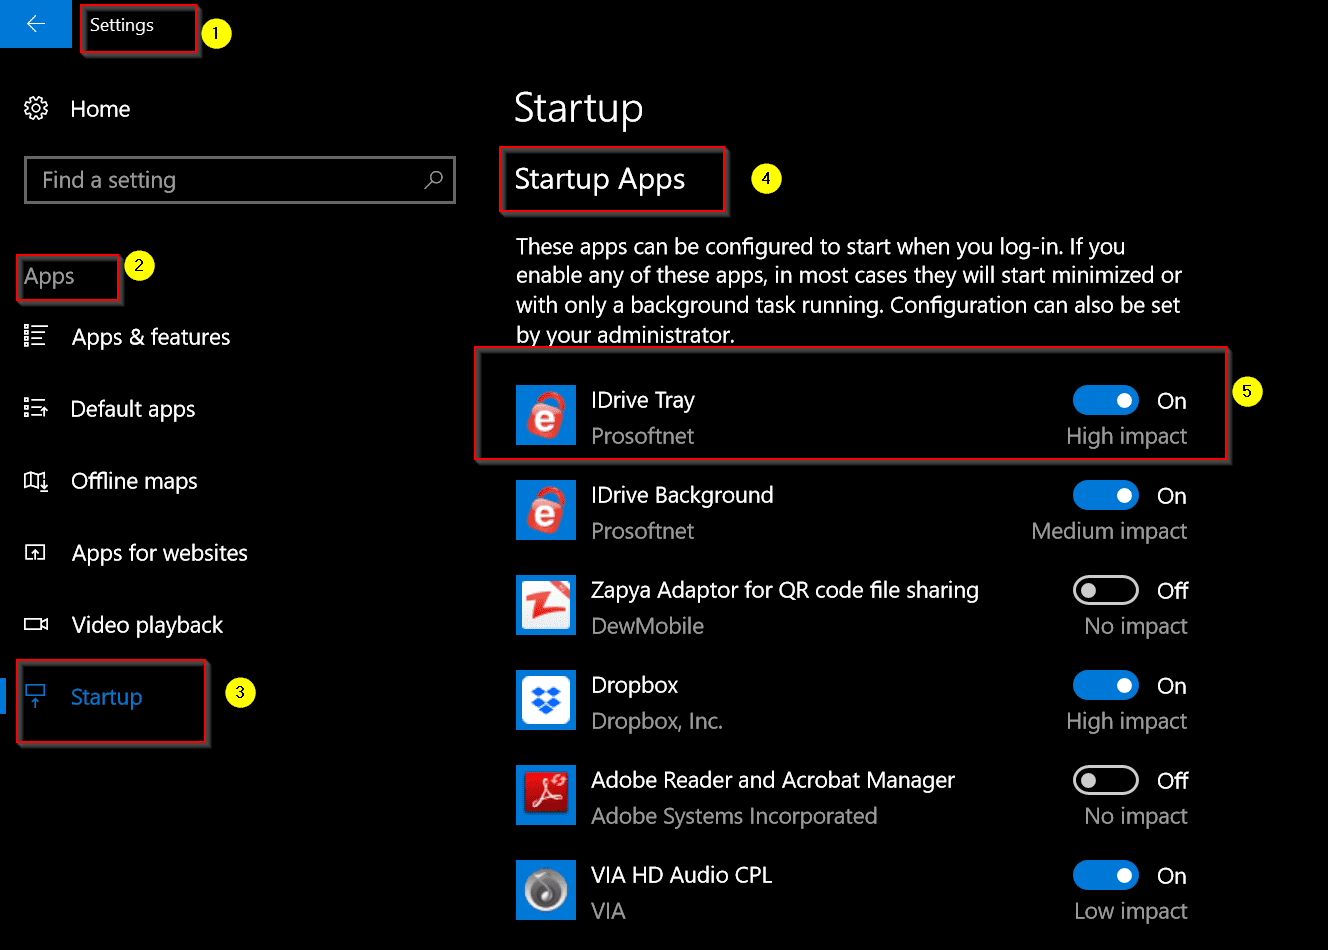 Startup Apps Windows 10 Build 17017 Review